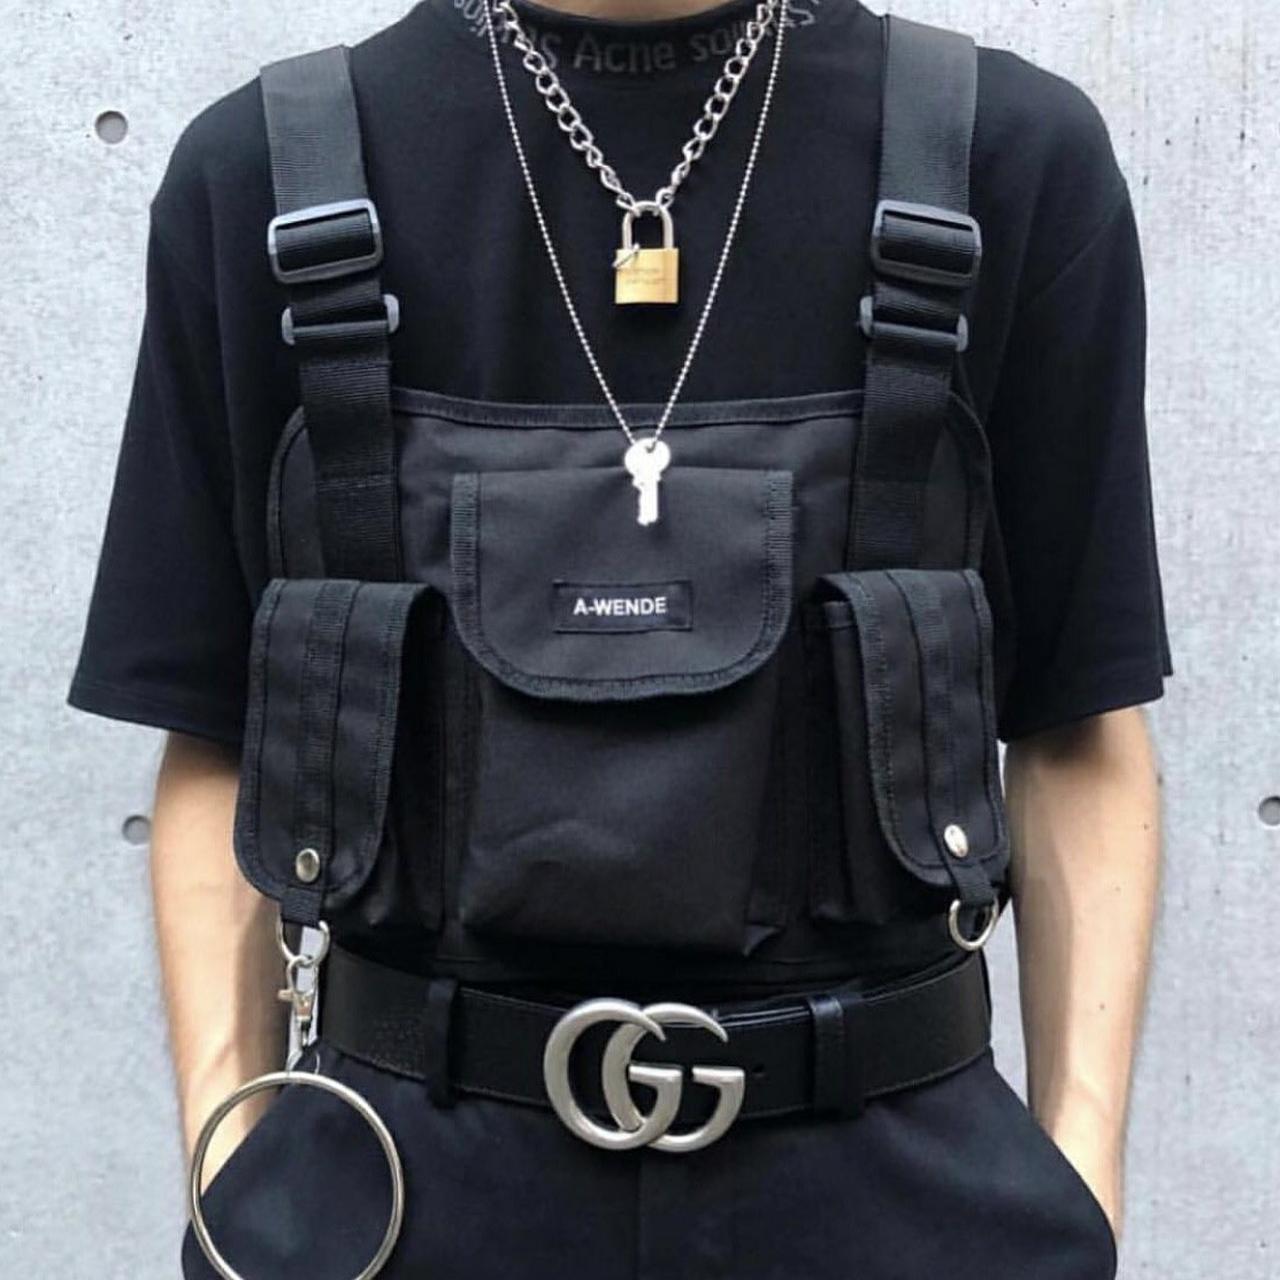 A WENDE / A-WENDE / CHEST RIG / CHEST BAG / BLACK /...